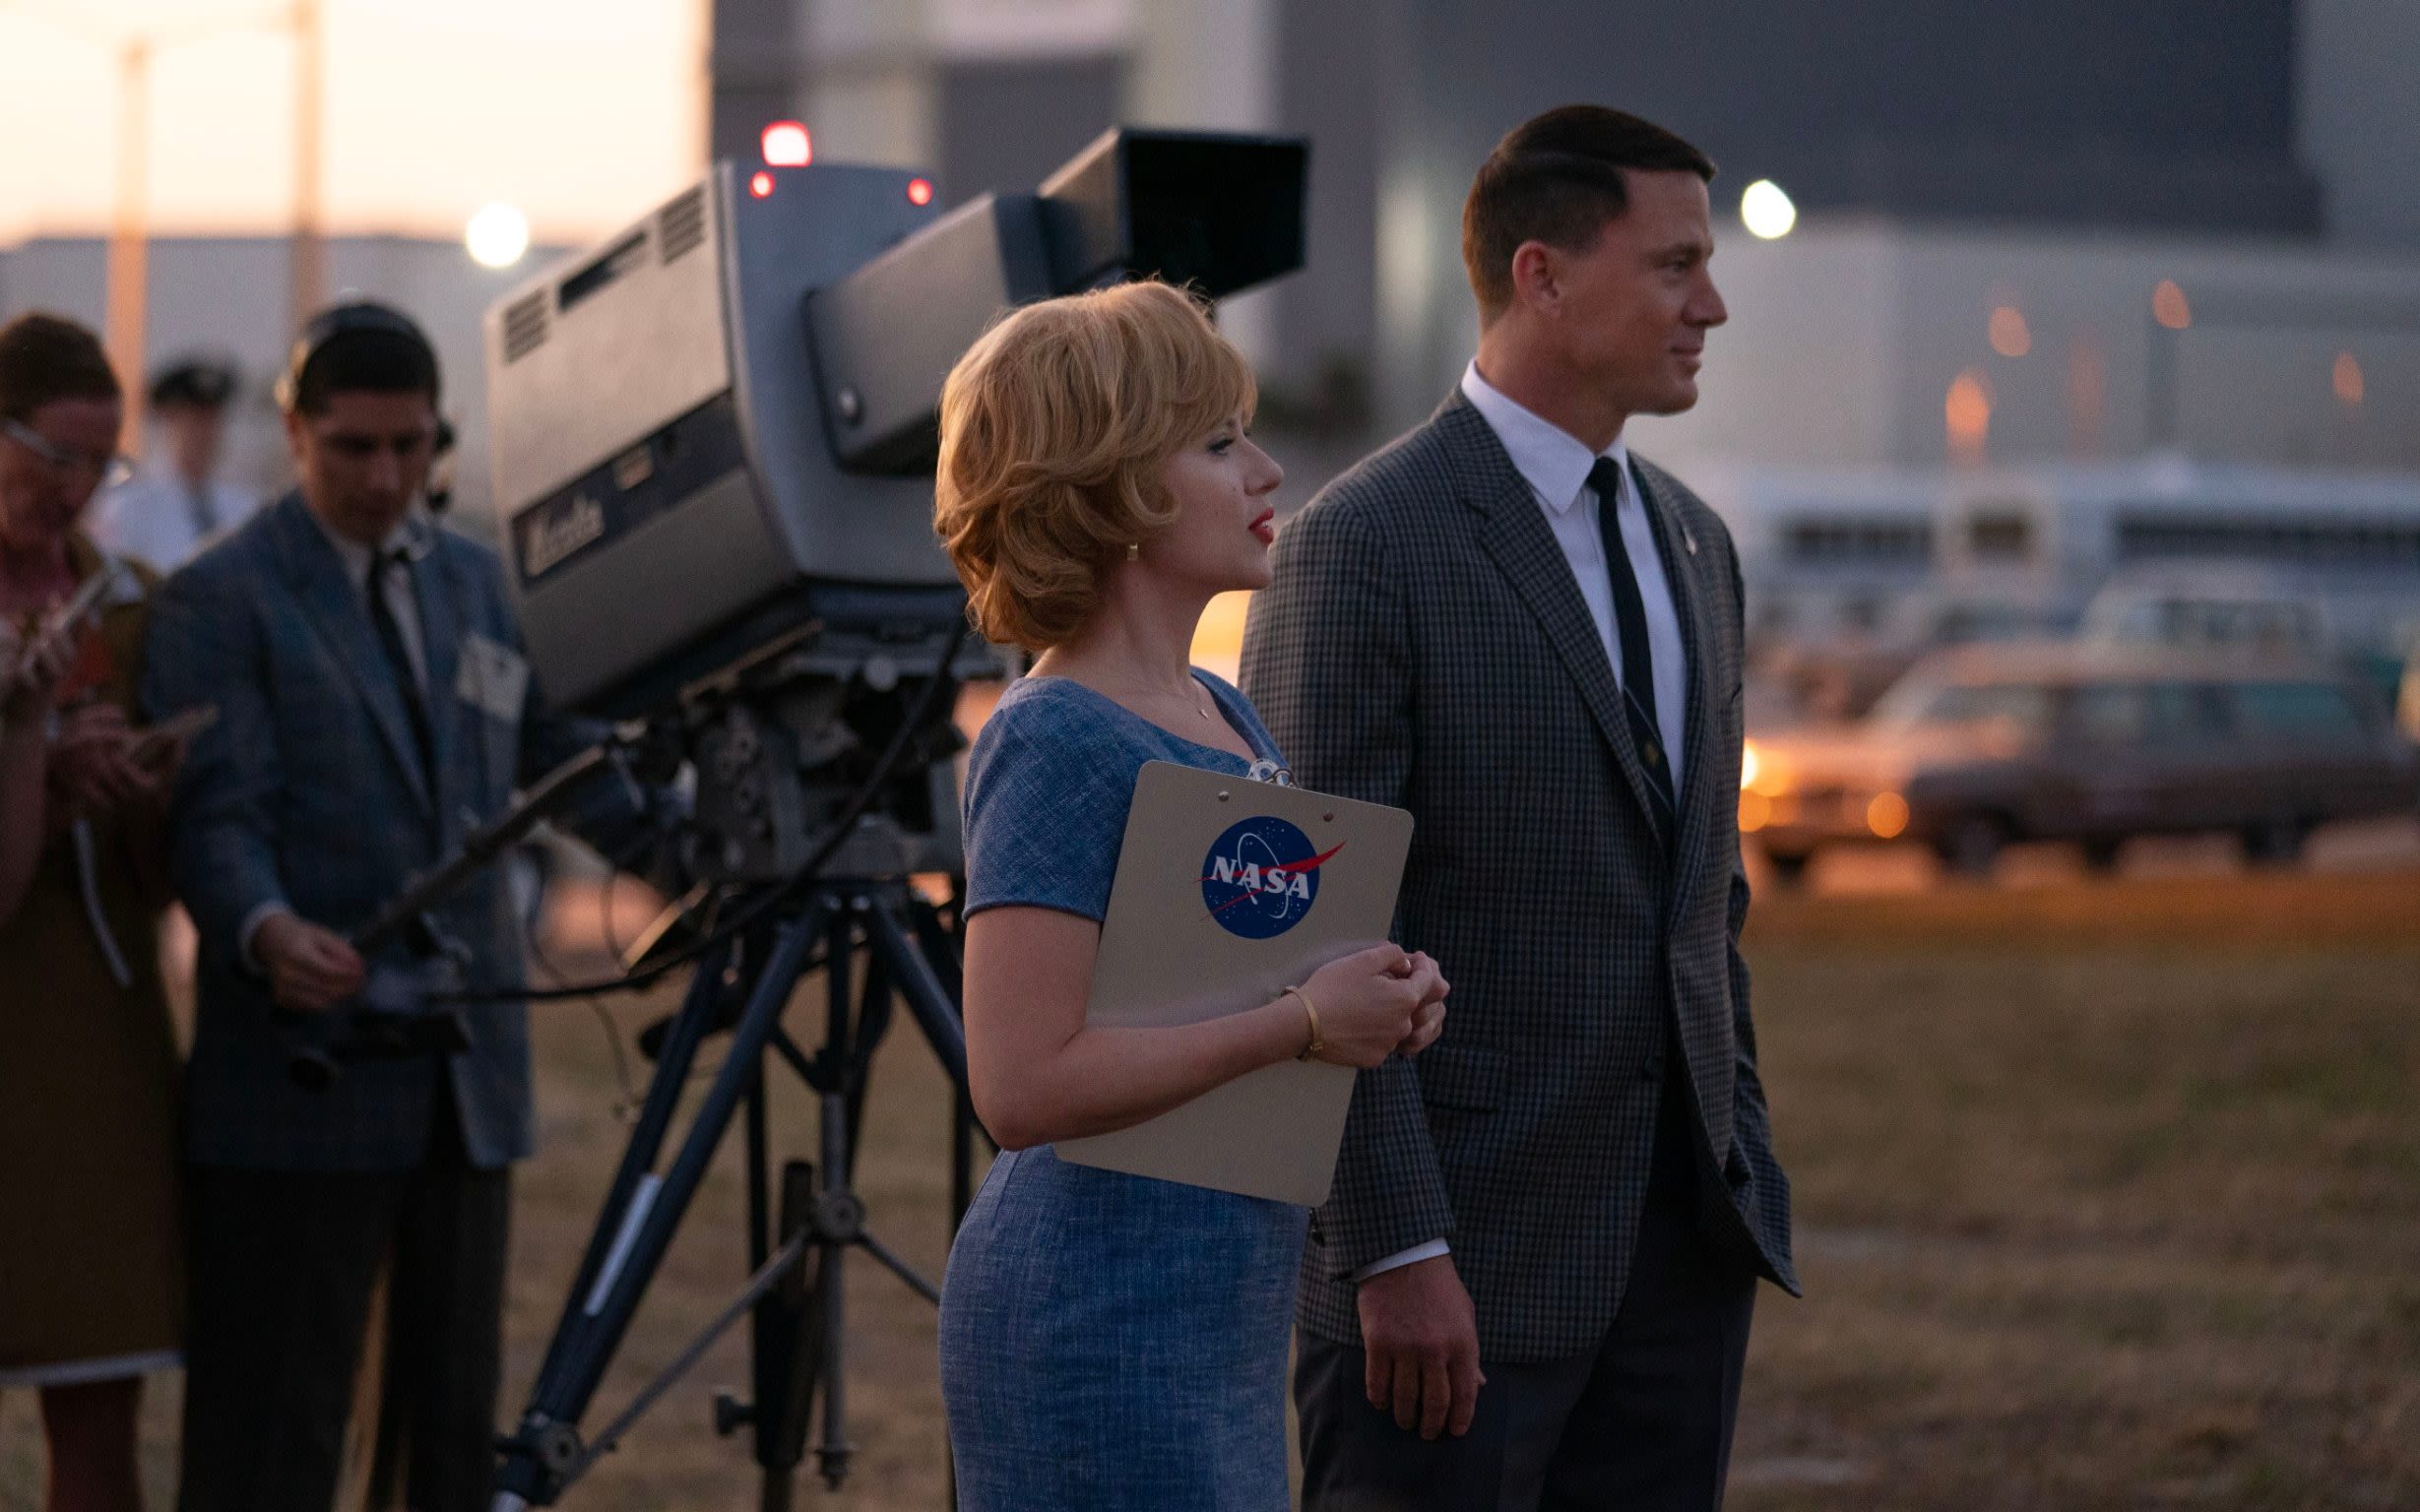 Fly Me to the Moon: Scarlett Johansson shines – but Channing Tatum drags this space romcom back to Earth